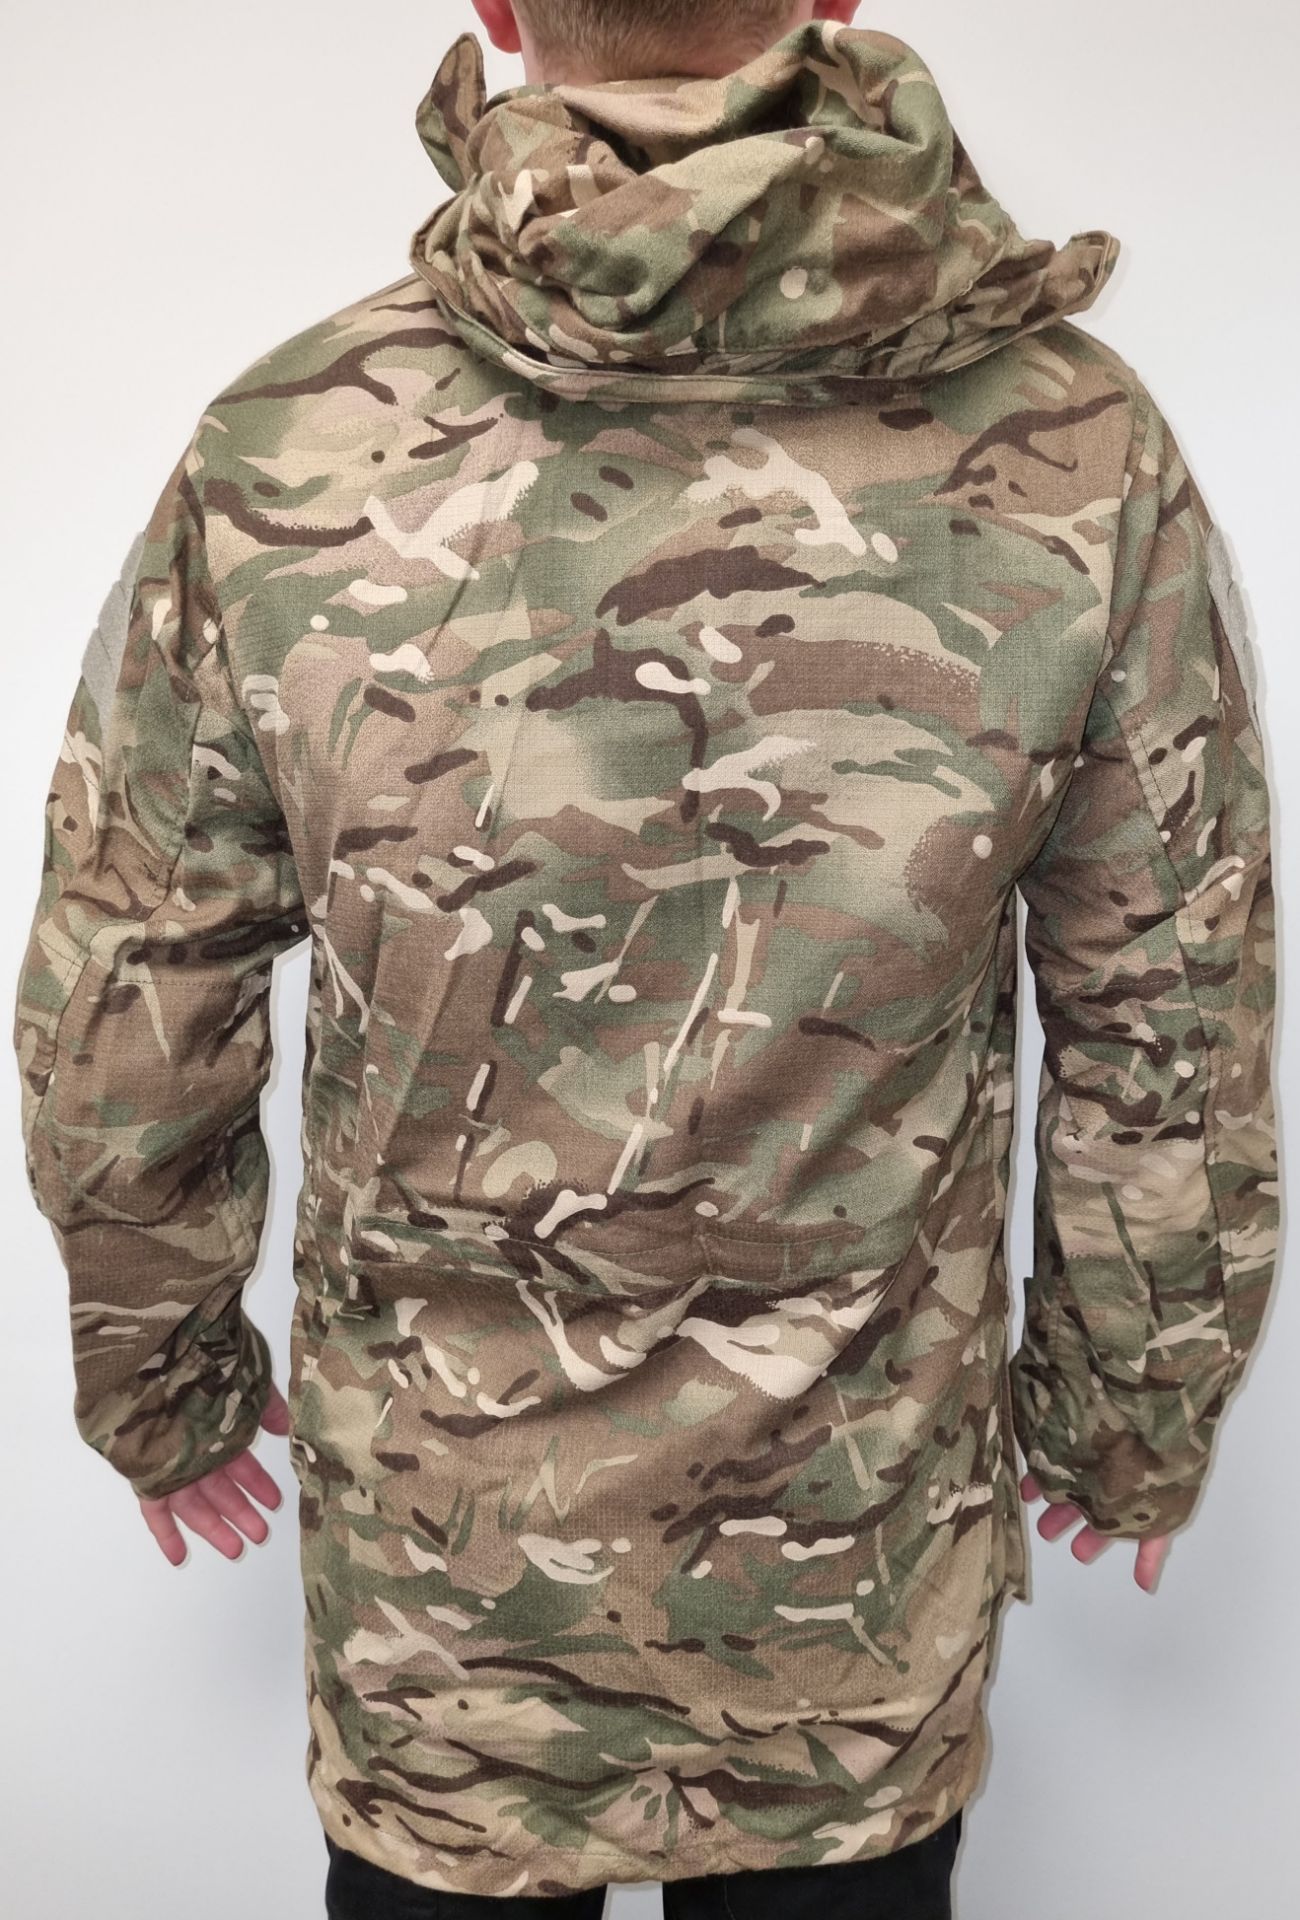 20x British Army MTP windproof smocks - mixed grades and sizes - Image 3 of 9